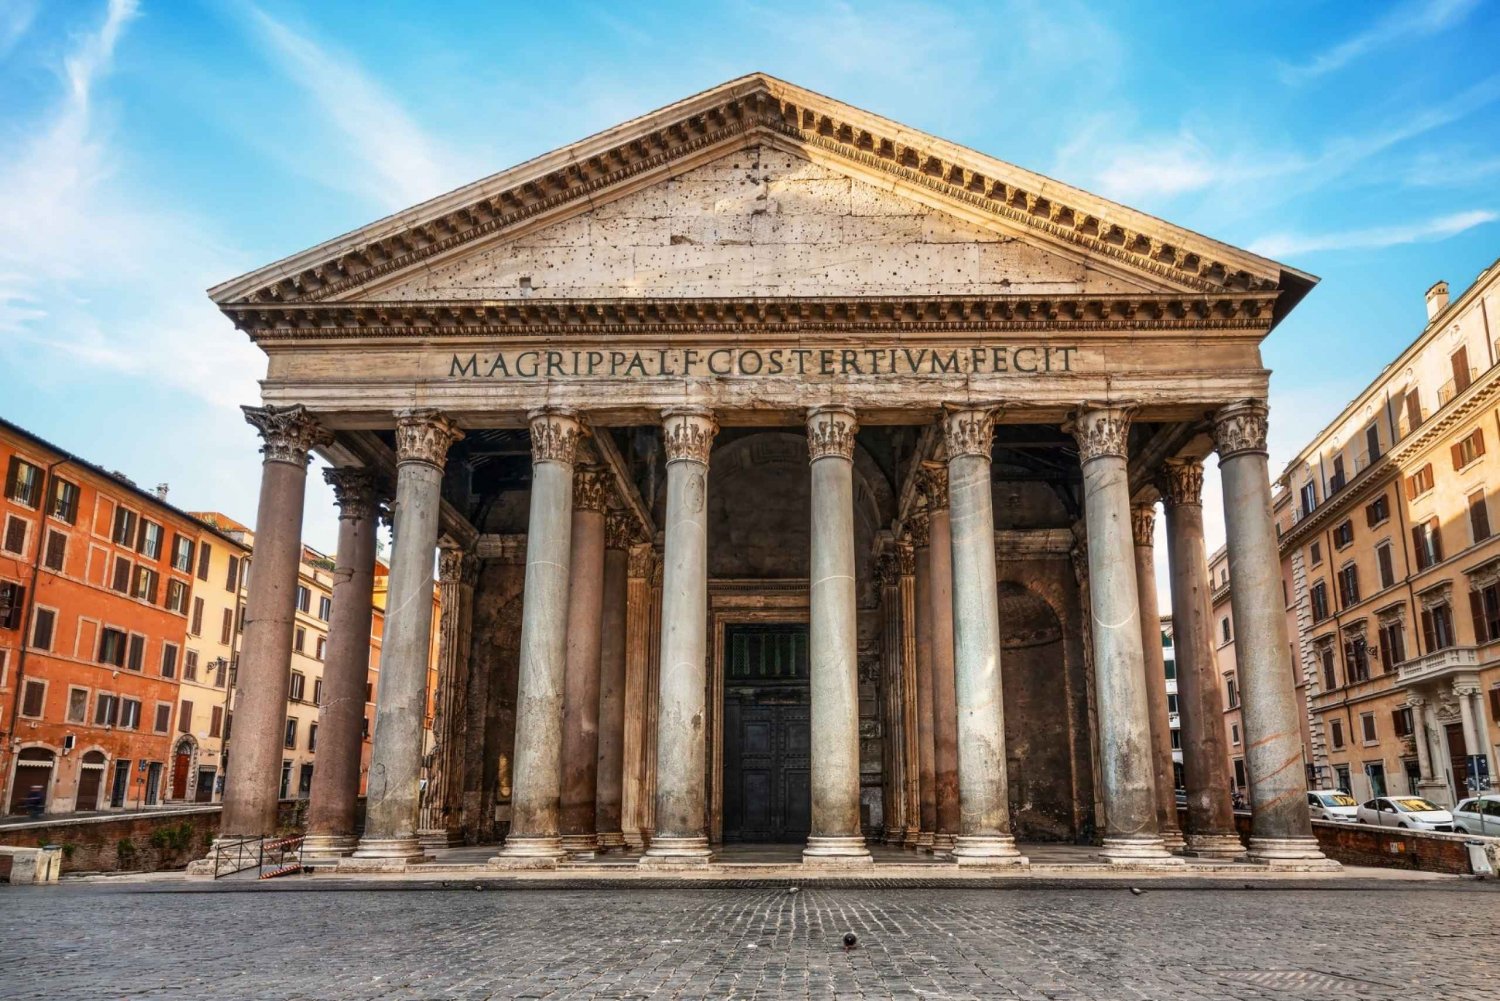 Rome: Pantheon No Wait Entry Ticket and Digital Audio Guide